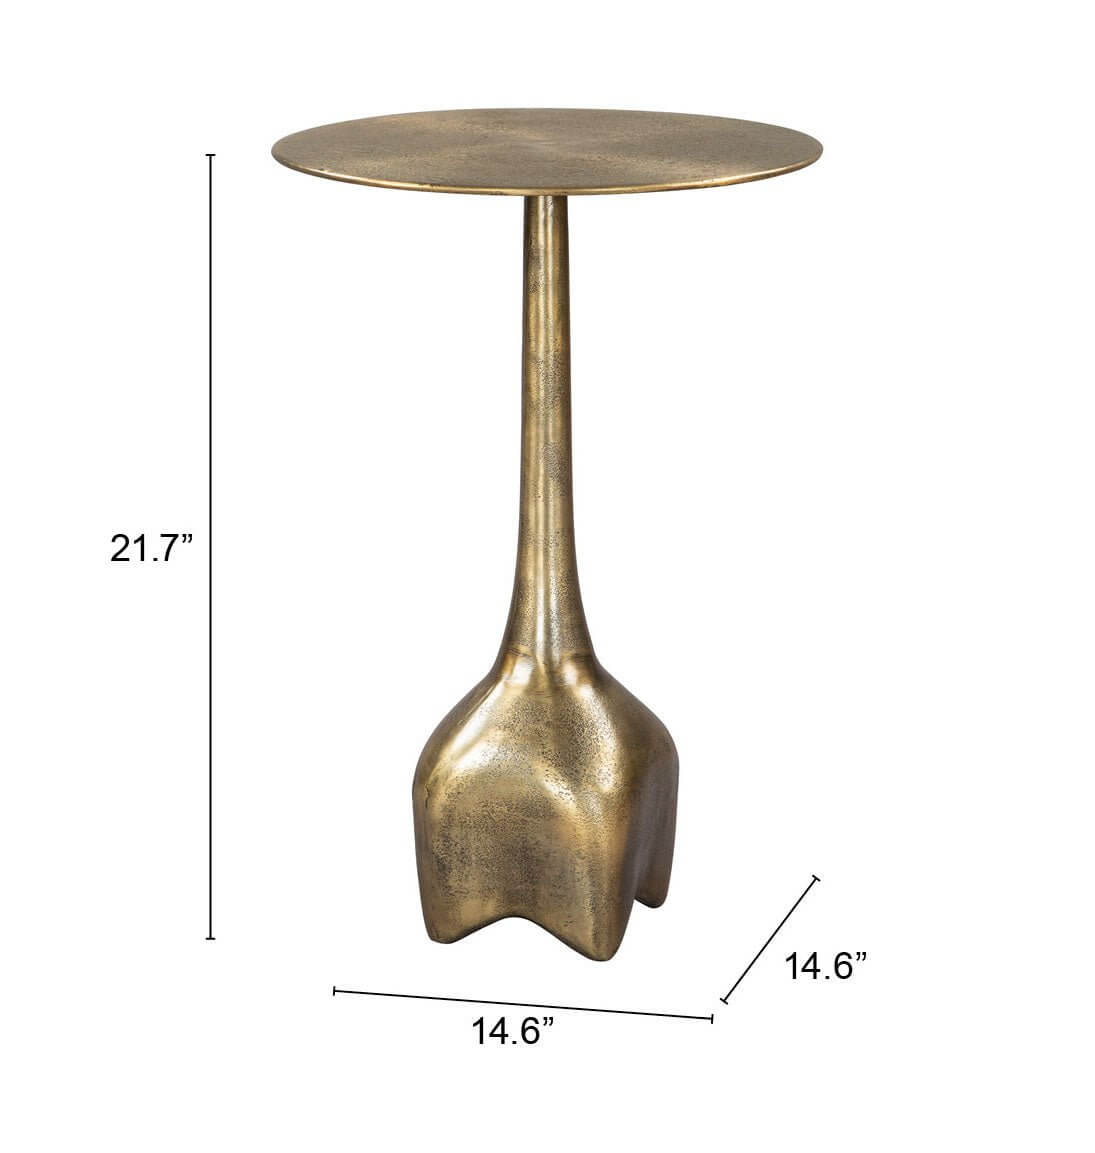 Lexi Metal Round Side End Table in Colors Charcoal or Antique Brass - Revel Sofa 